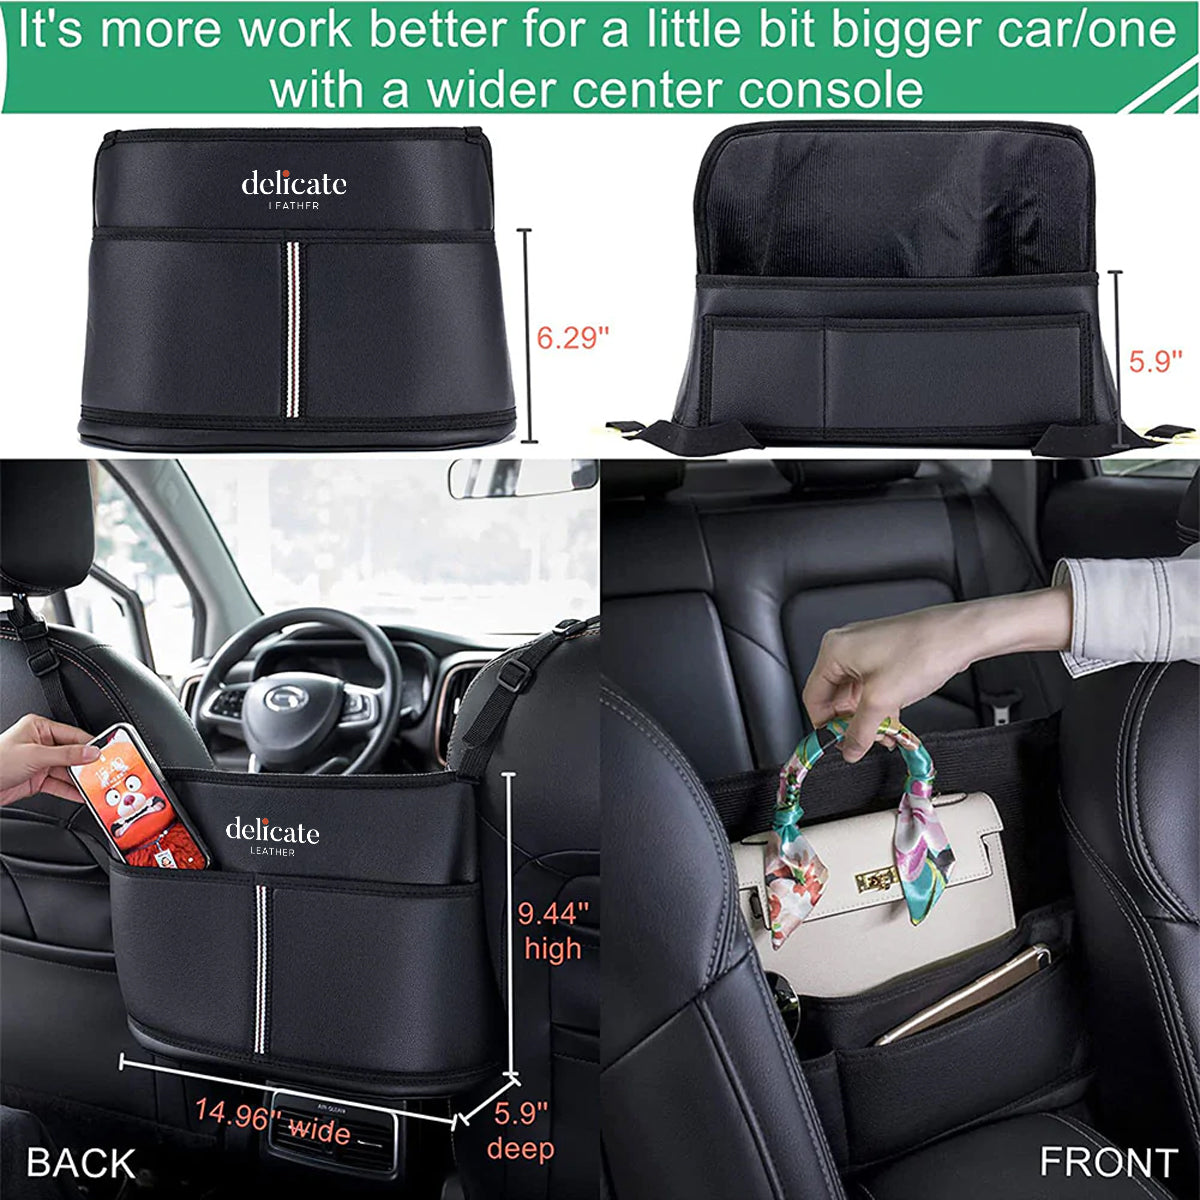 Car Purse Holder for Car Handbag Holder Between Seats Premium PU Leather, Custom Fir For Your Cars, Auto Driver Or Passenger Accessories Organizer, Hanging Car Purse Storage Pocket Back Seat Pet Barrier JG11991 - Delicate Leather